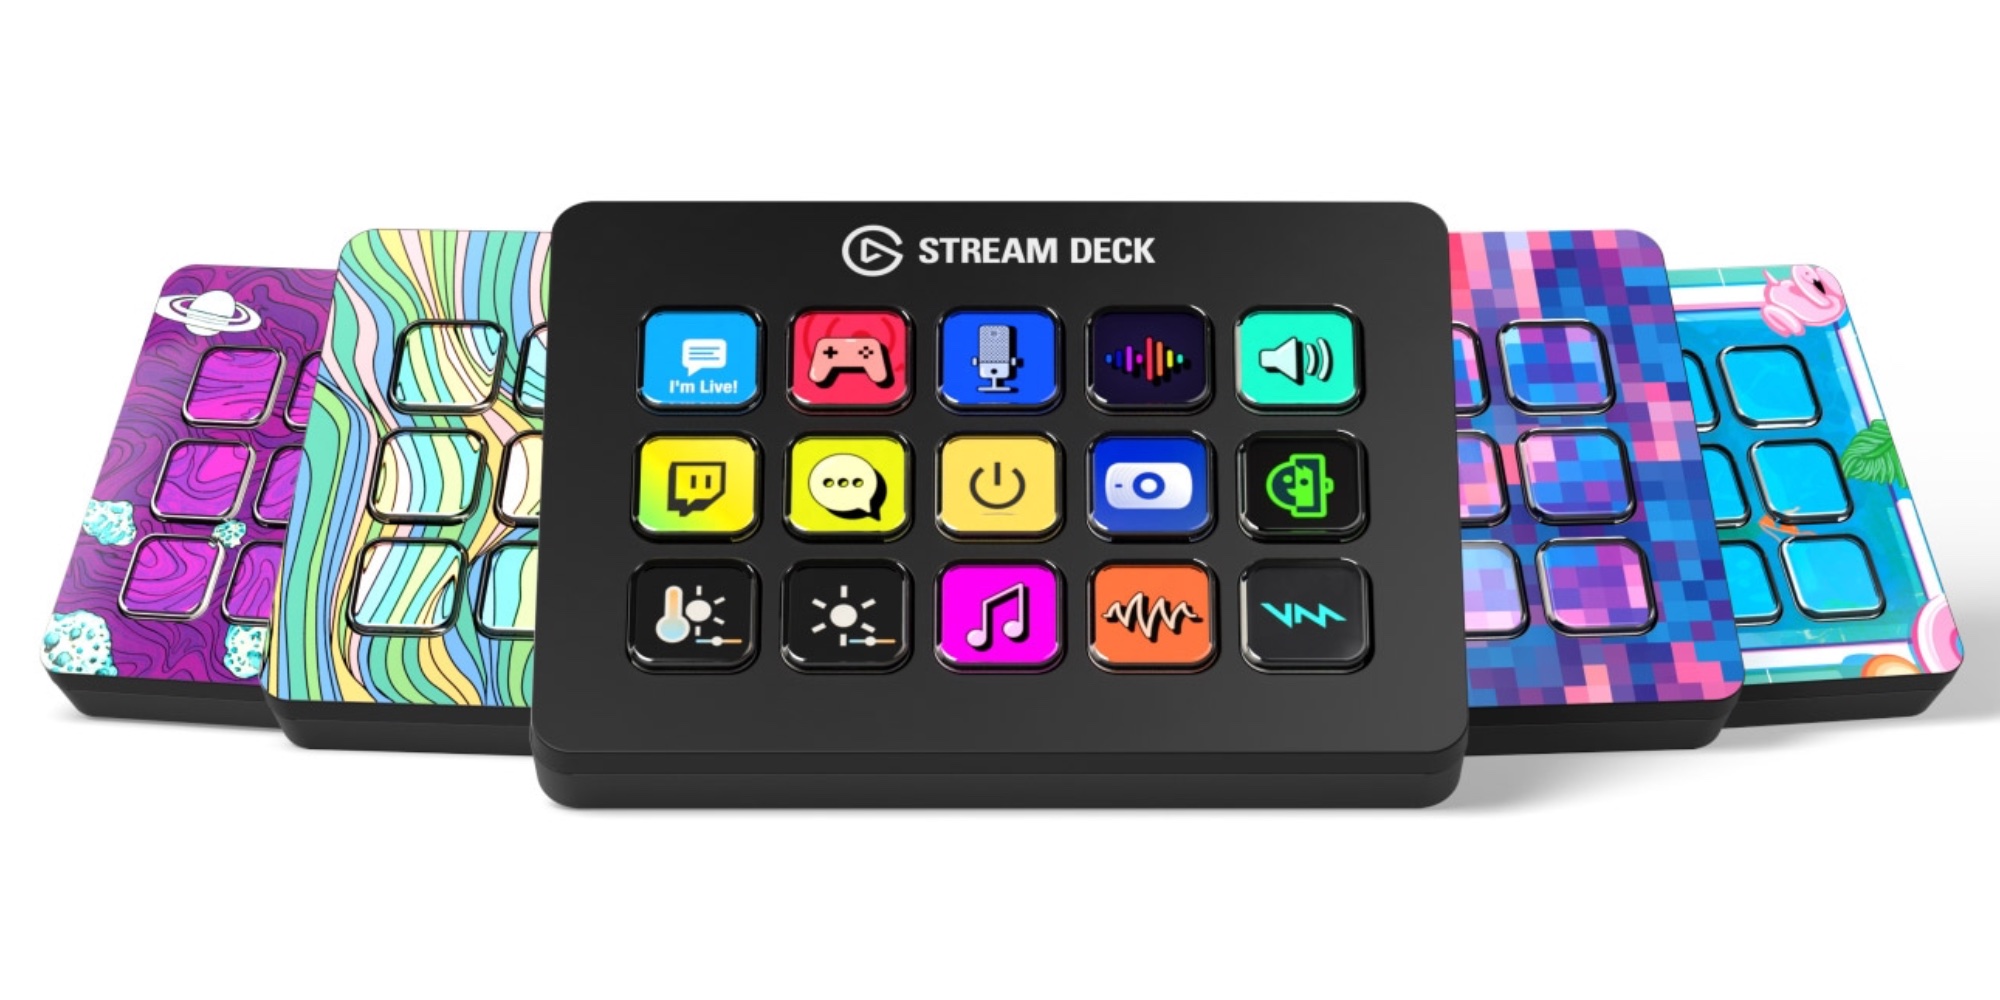 Elgato's new Stream Deck MK.2 is on sale for only the second time 